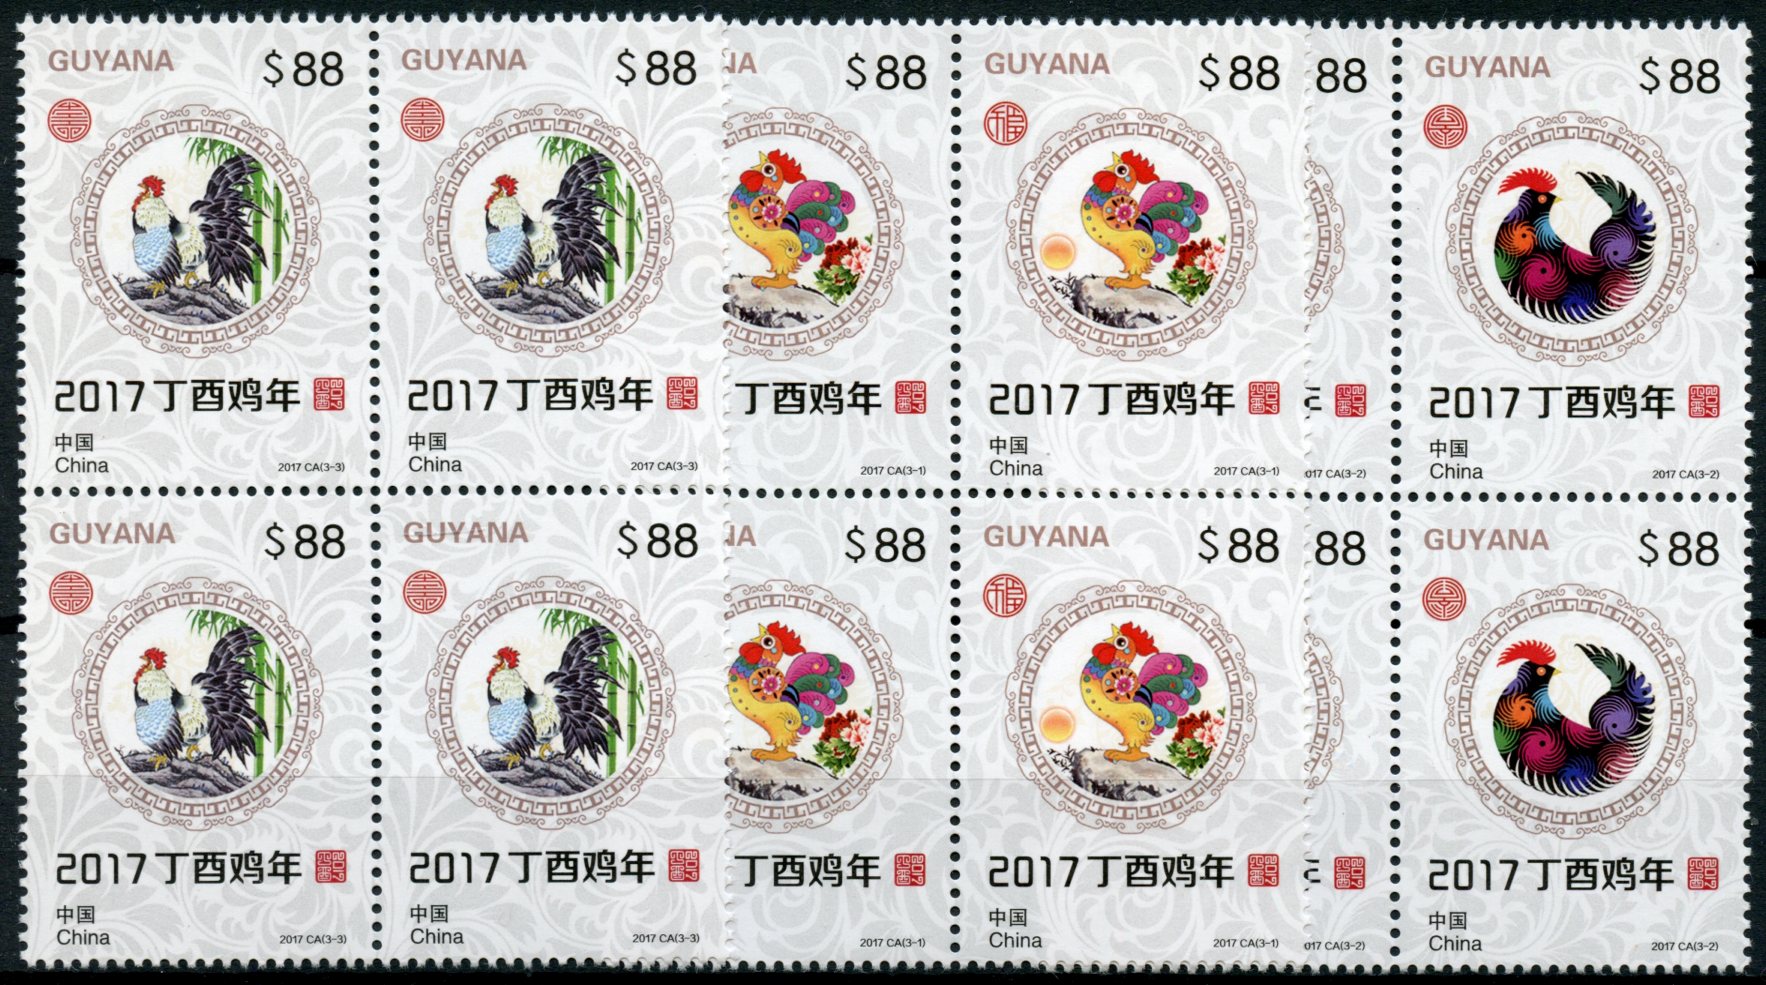 Guyana 2017 MNH Year of Rooster 3x 4v Block Chinese Lunar New Year Zodiac Stamps